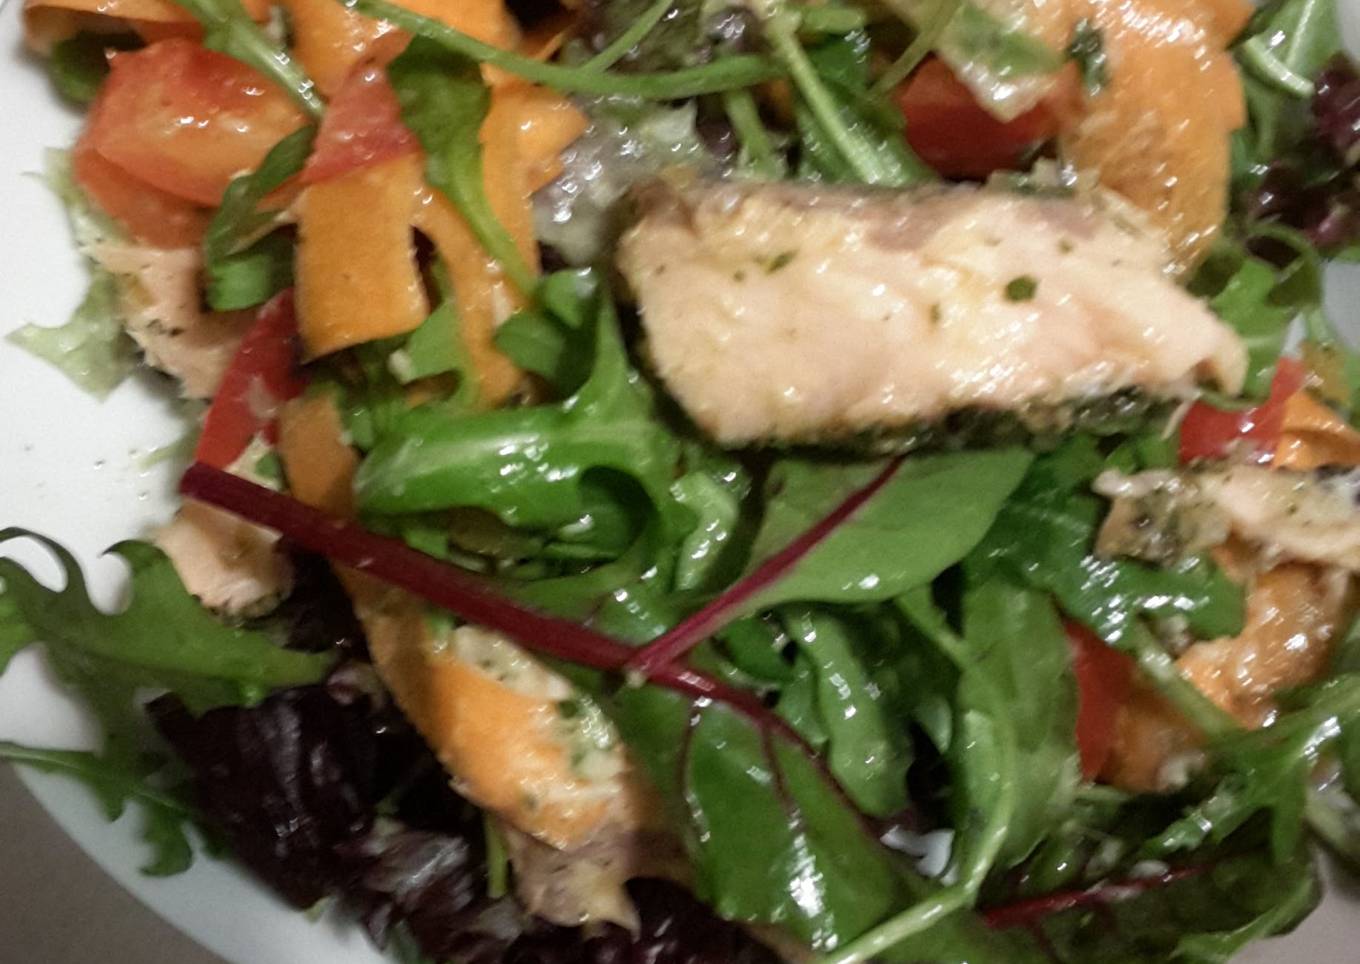 Filling healthy dinner: salmon salad with horsradish dressing and garlic bread on the side